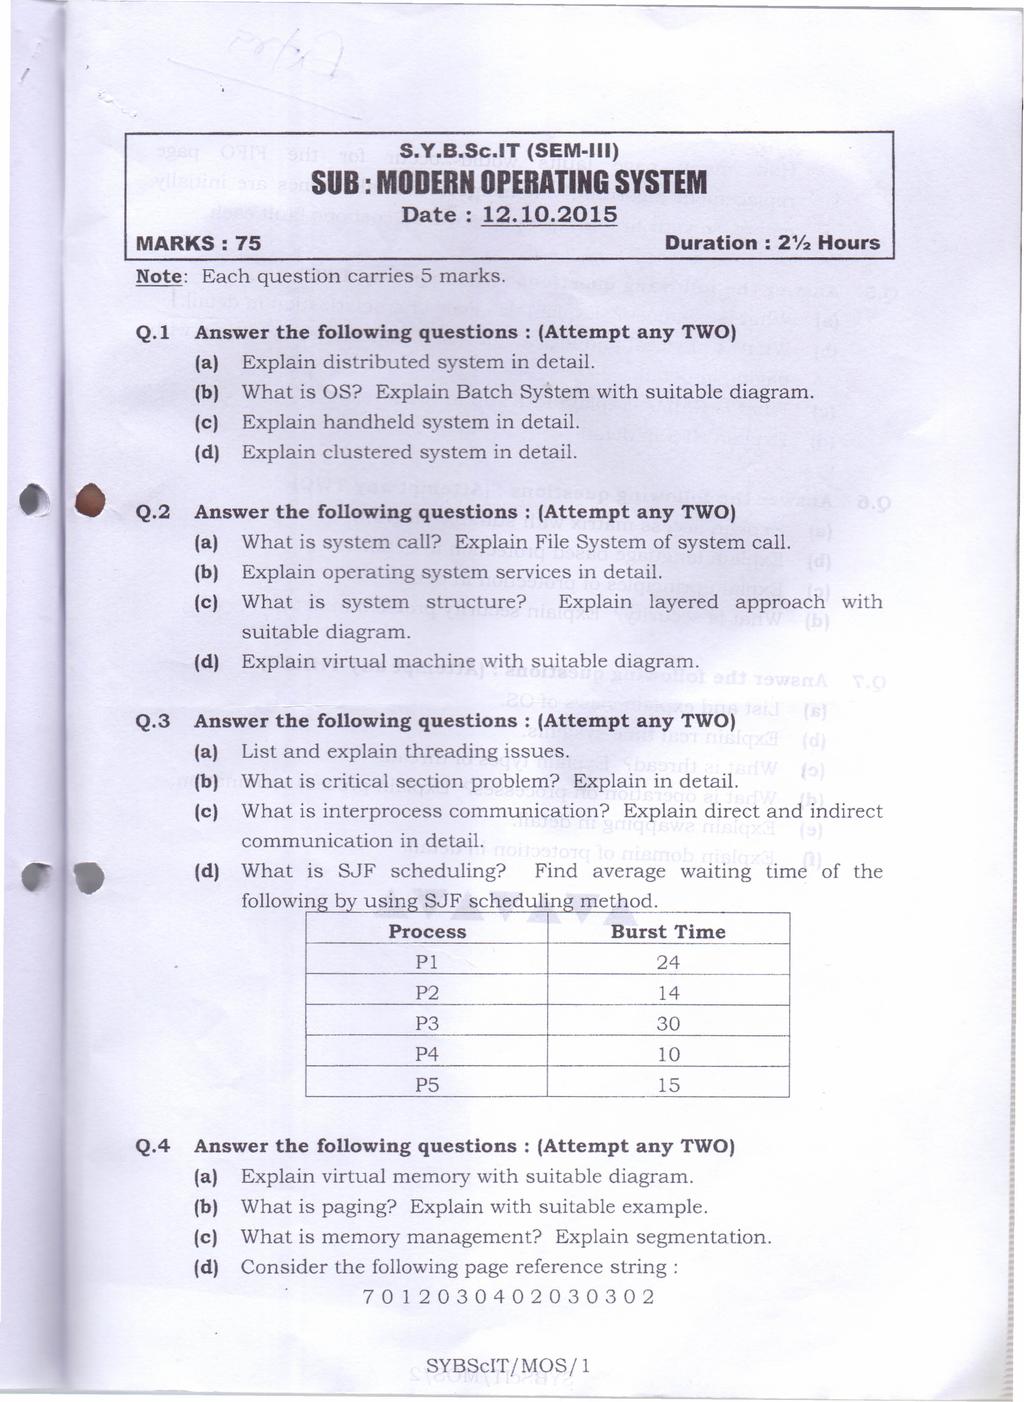 S.Y.B.Se.IT (SEM-III) SUB: MODERN OPERATING SYSTEM Date: 12.10.2015 MARKS: 75 Duration : 2Y2 Hours Note: Each question carries 5 marks. Q.